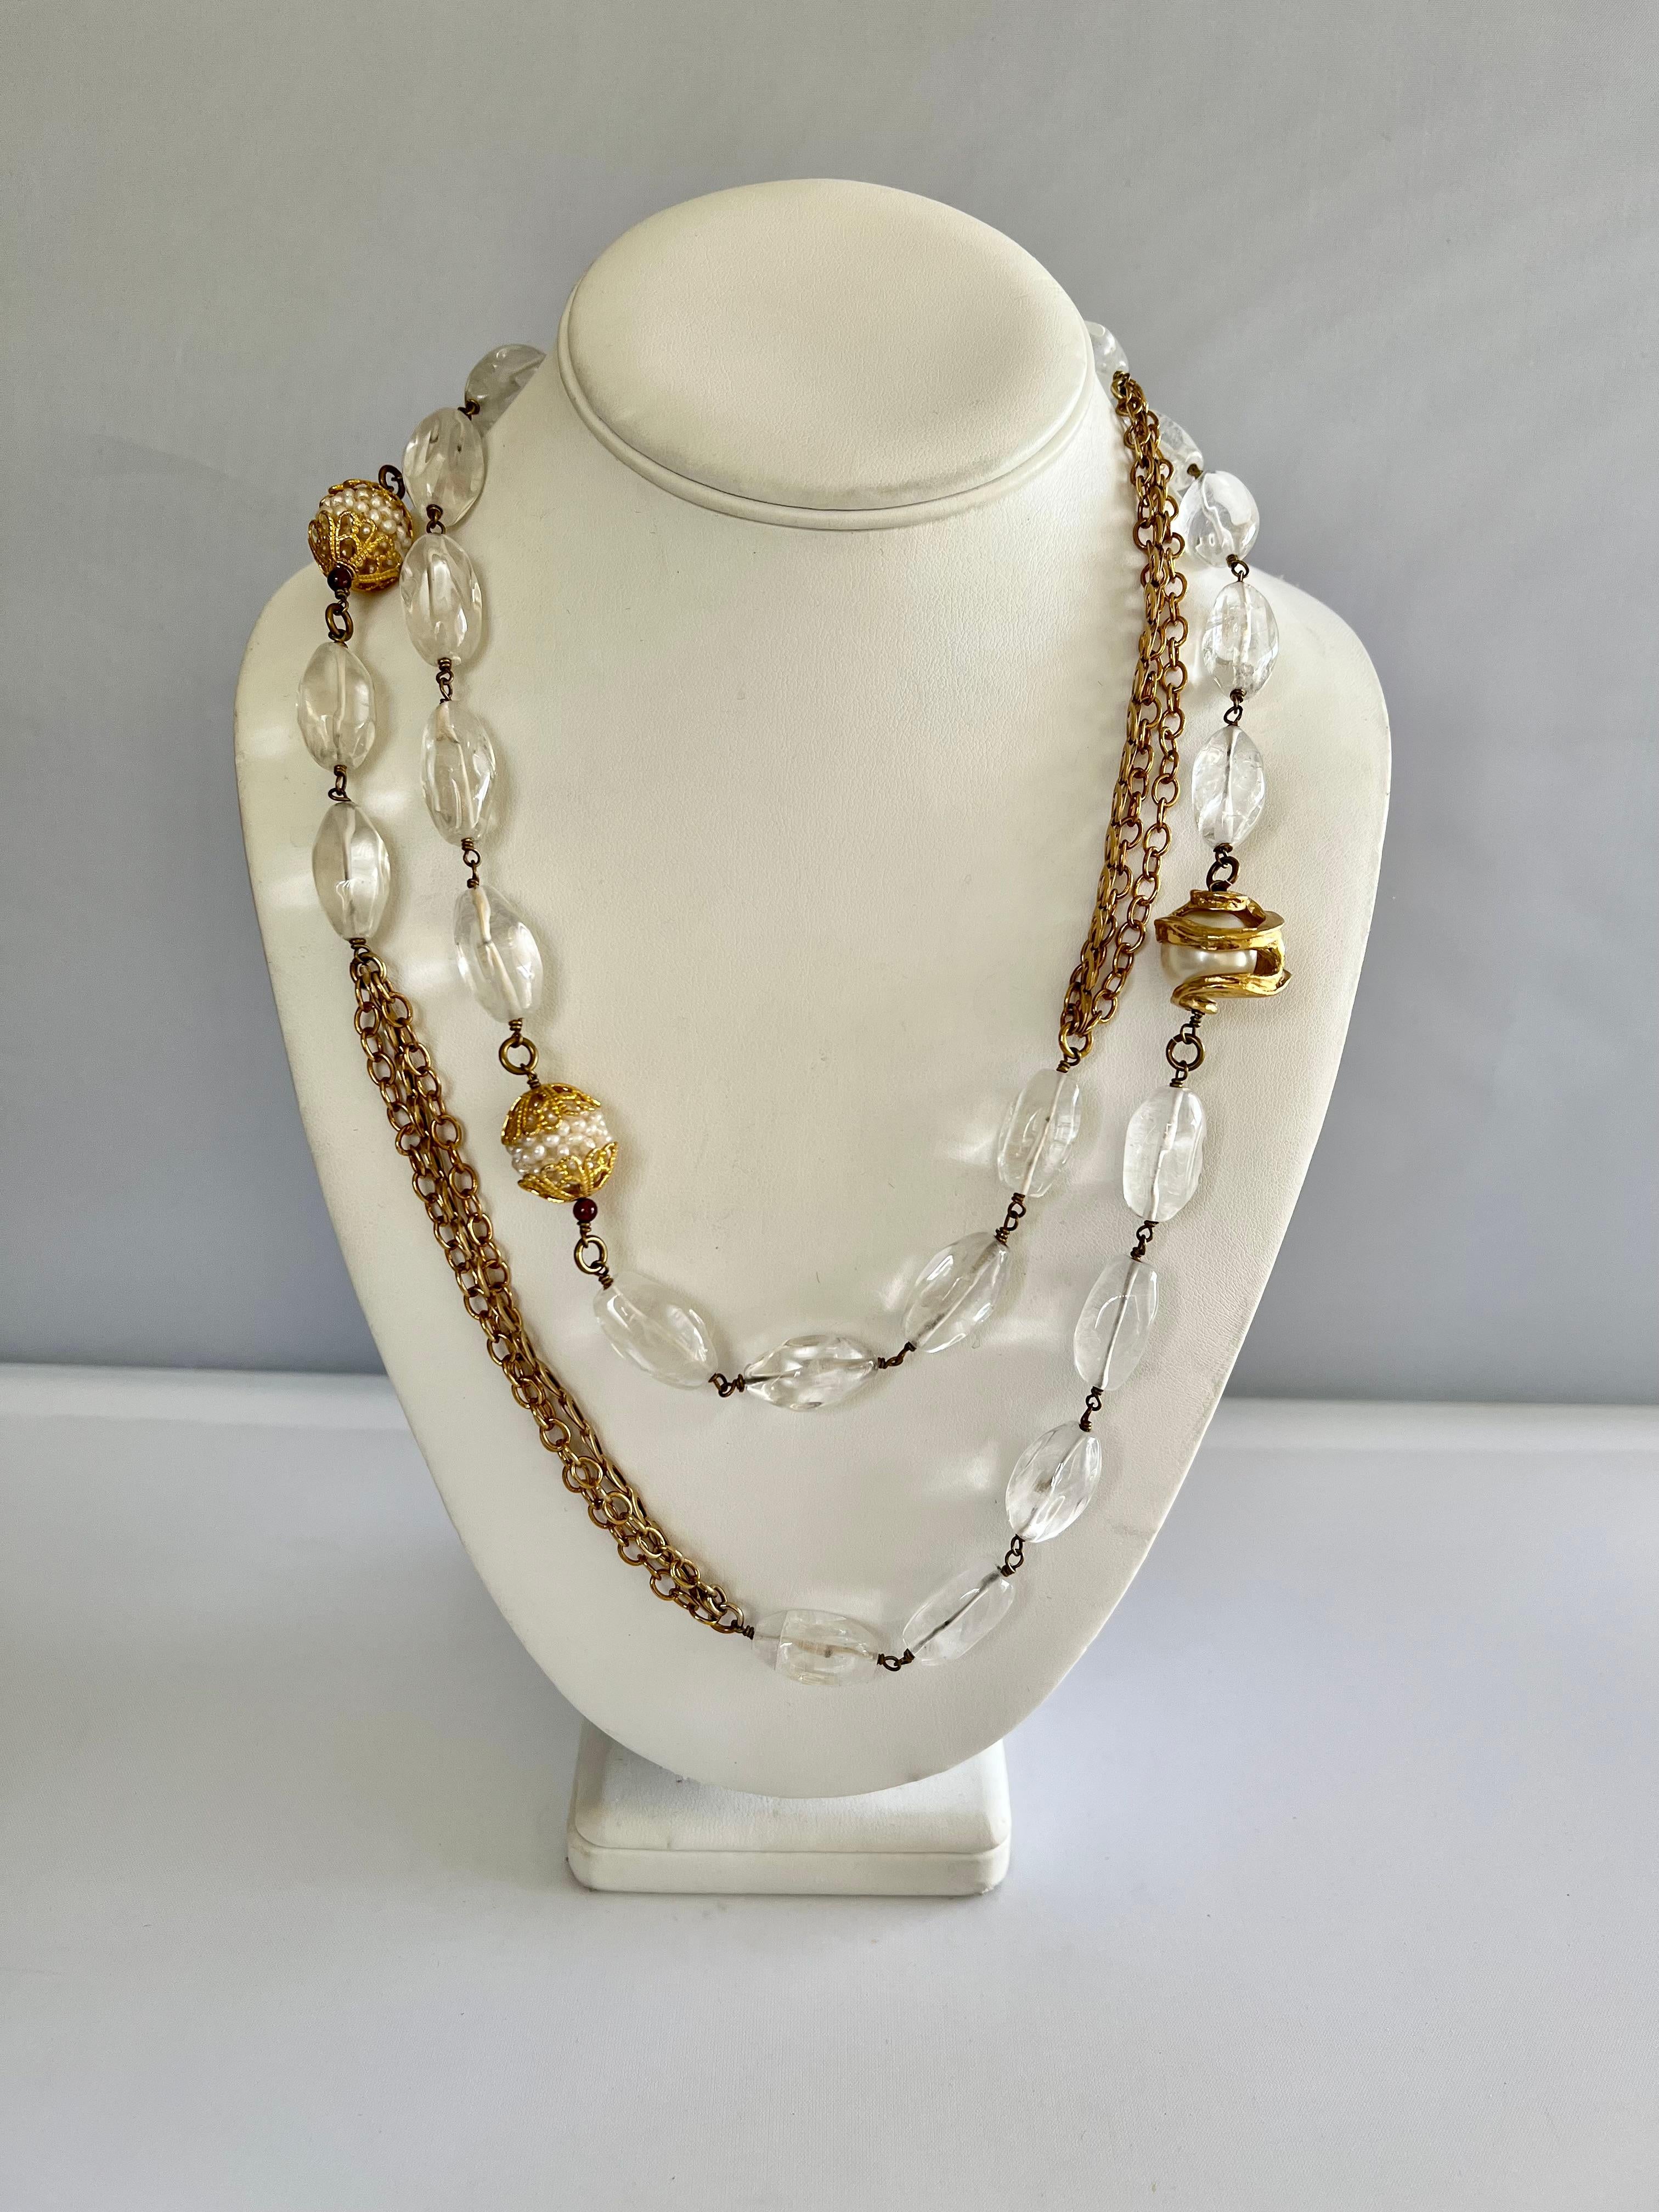 French sautoir gilt necklace with faux pearls, rock crystal, and bronze embellishments - made in Paris France. 